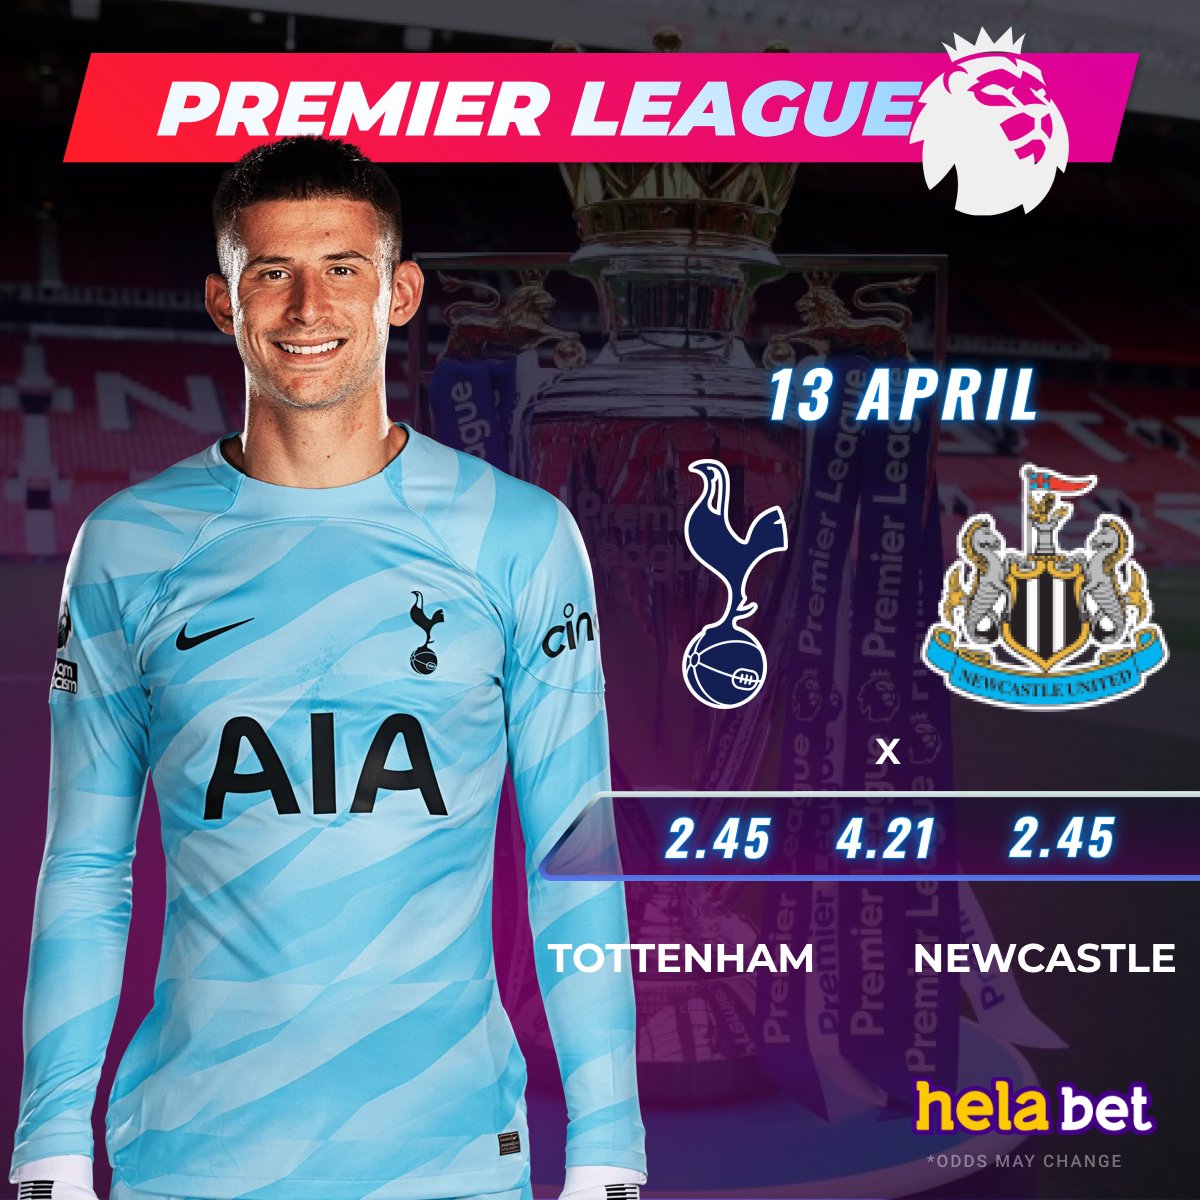 🇬🇧 EPL ⚽ #Tottenham vs #Newcastle 👉 Tottenham are unbeaten in 5 of their last 7 away matches against Newcastle Who will win this match? 👍Place a bet in #Helabet 👉 cutt.ly/UwY8h1uG #epl #premierleague #betting #sport